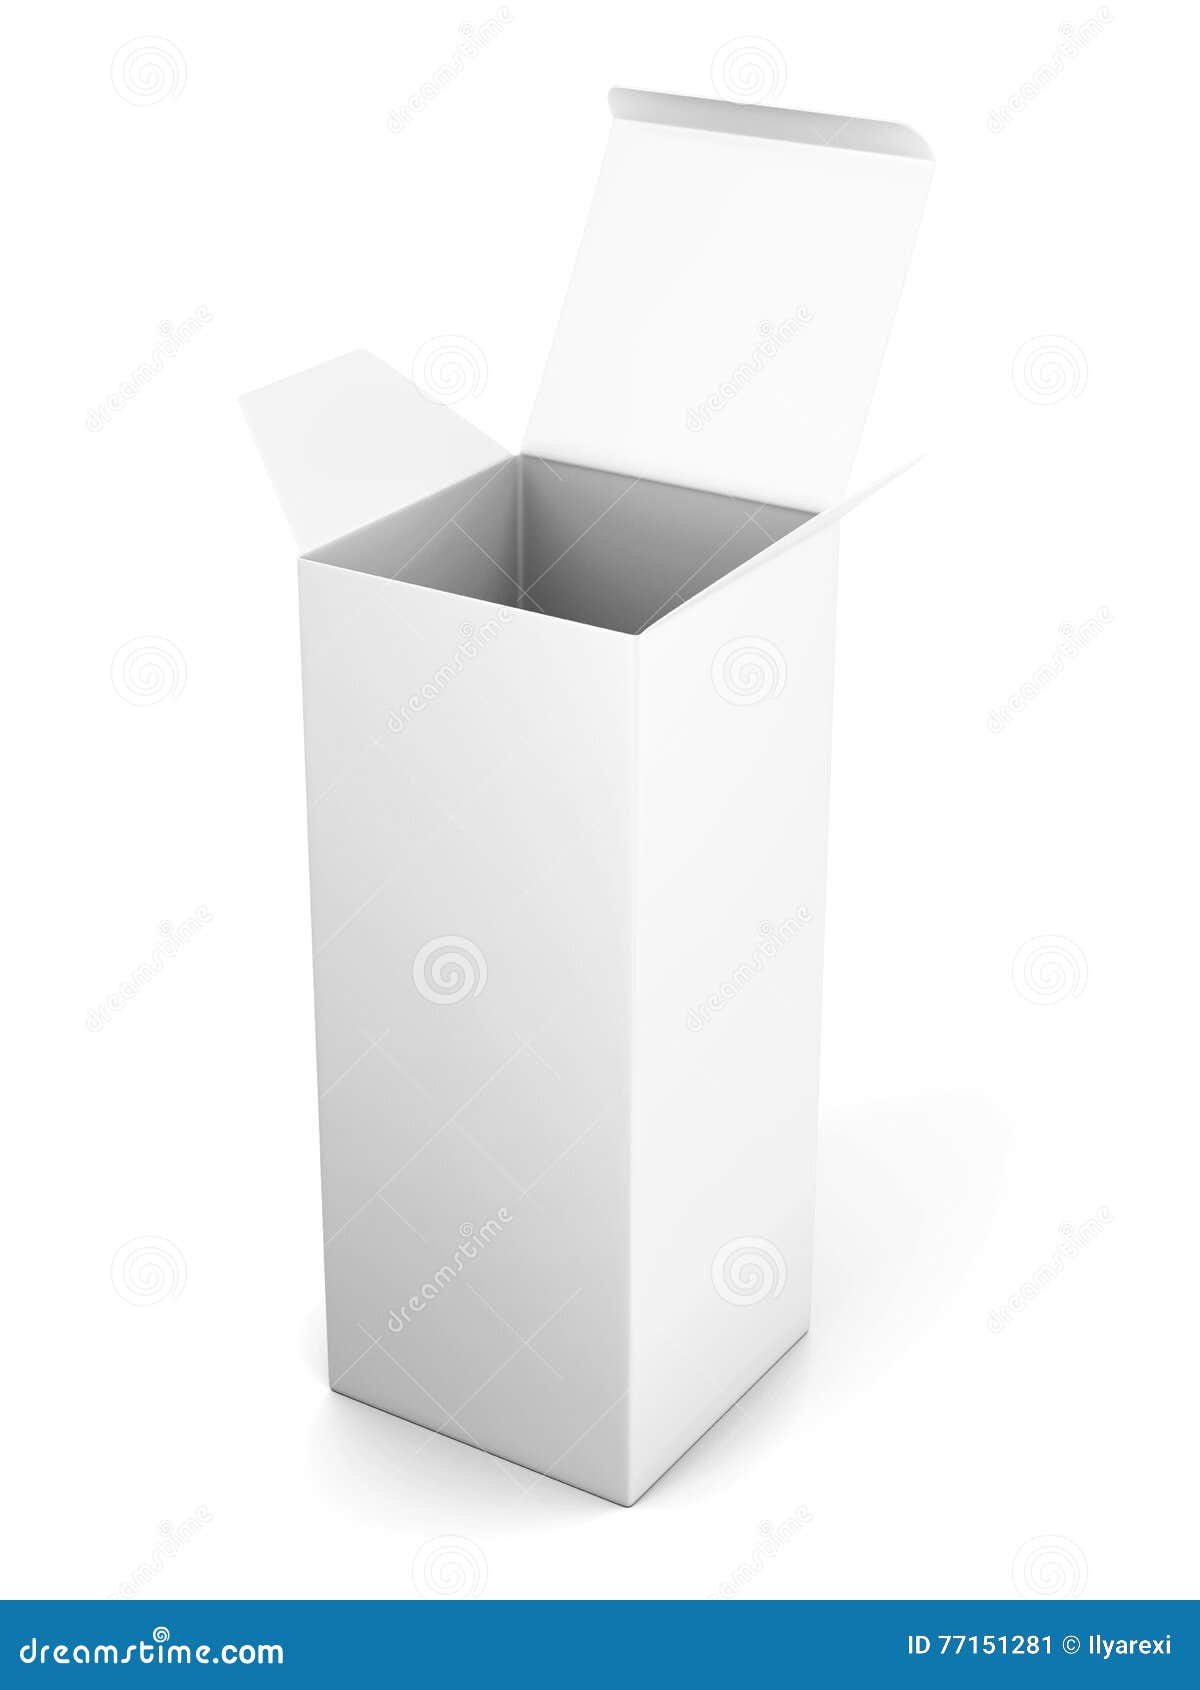 Download Blank Open Vertical Cardboard Box Template Standing On ...